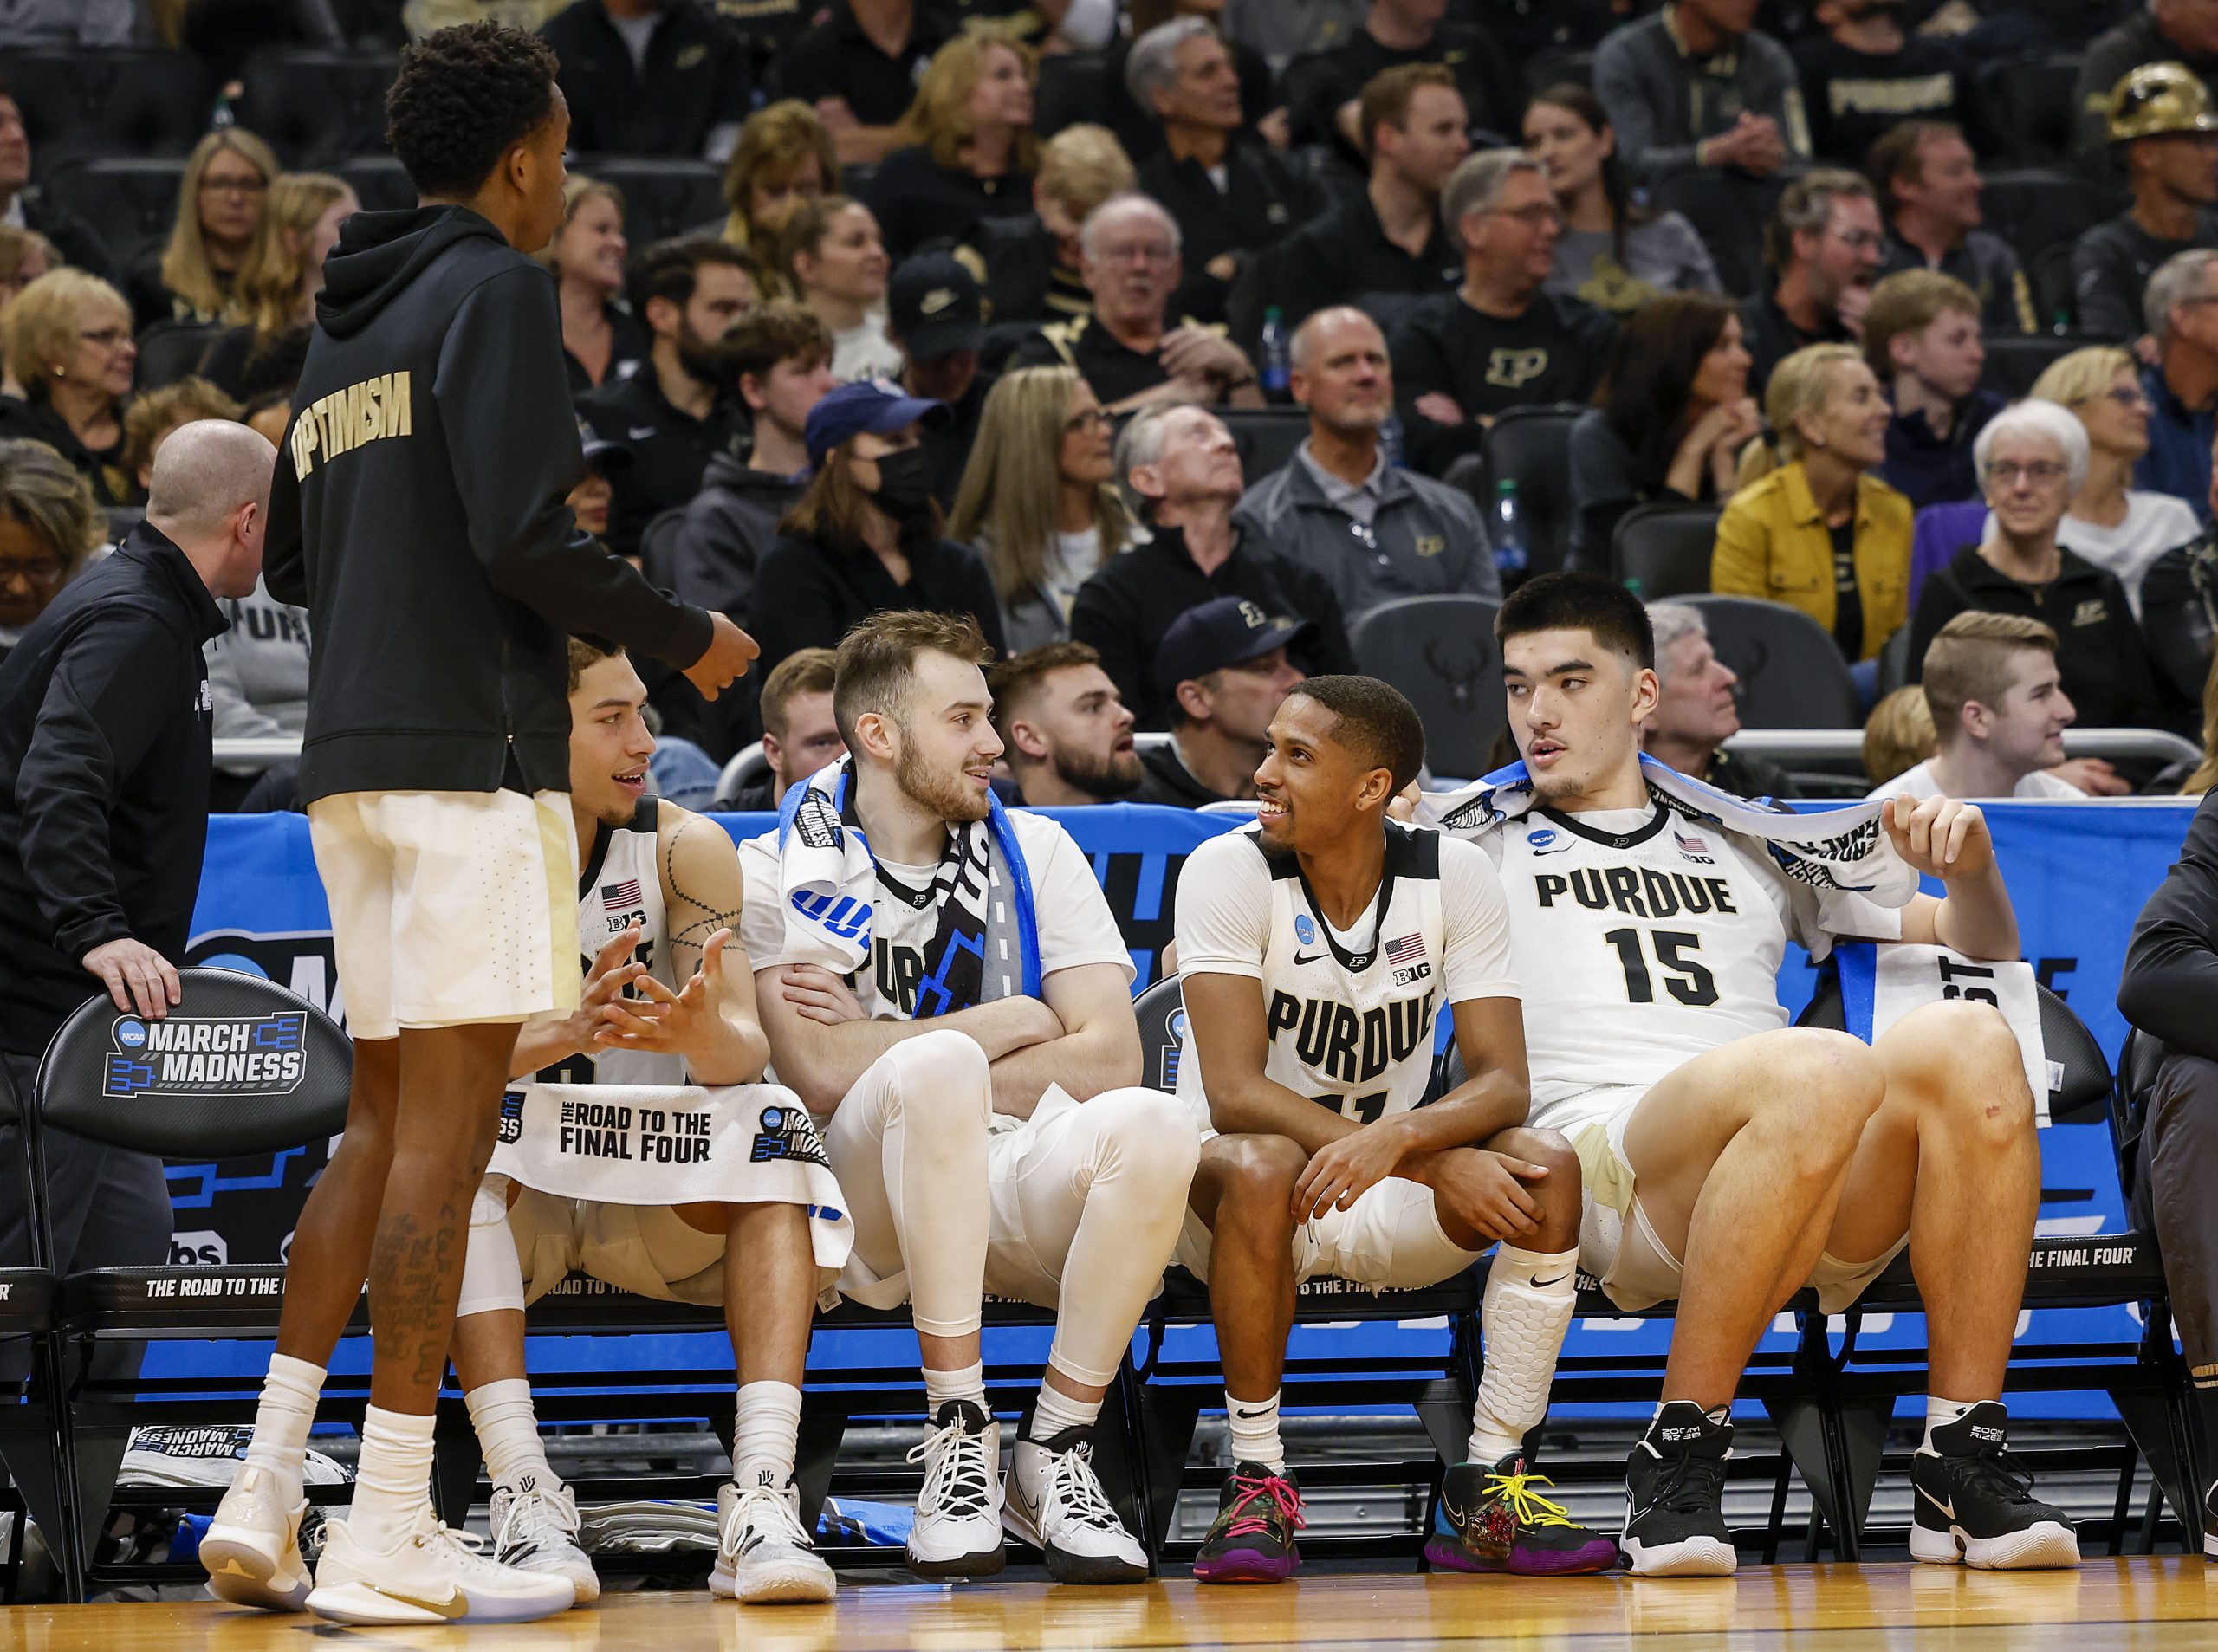 Purdue Boilermakers guard Sasha Stefanovic (55) and guard Isaiah Thompson (11) and center Zach Edey (15) talk on the bench during the second half against the Yale Bulldogs in the first round of the 2022 NCAA Tournament